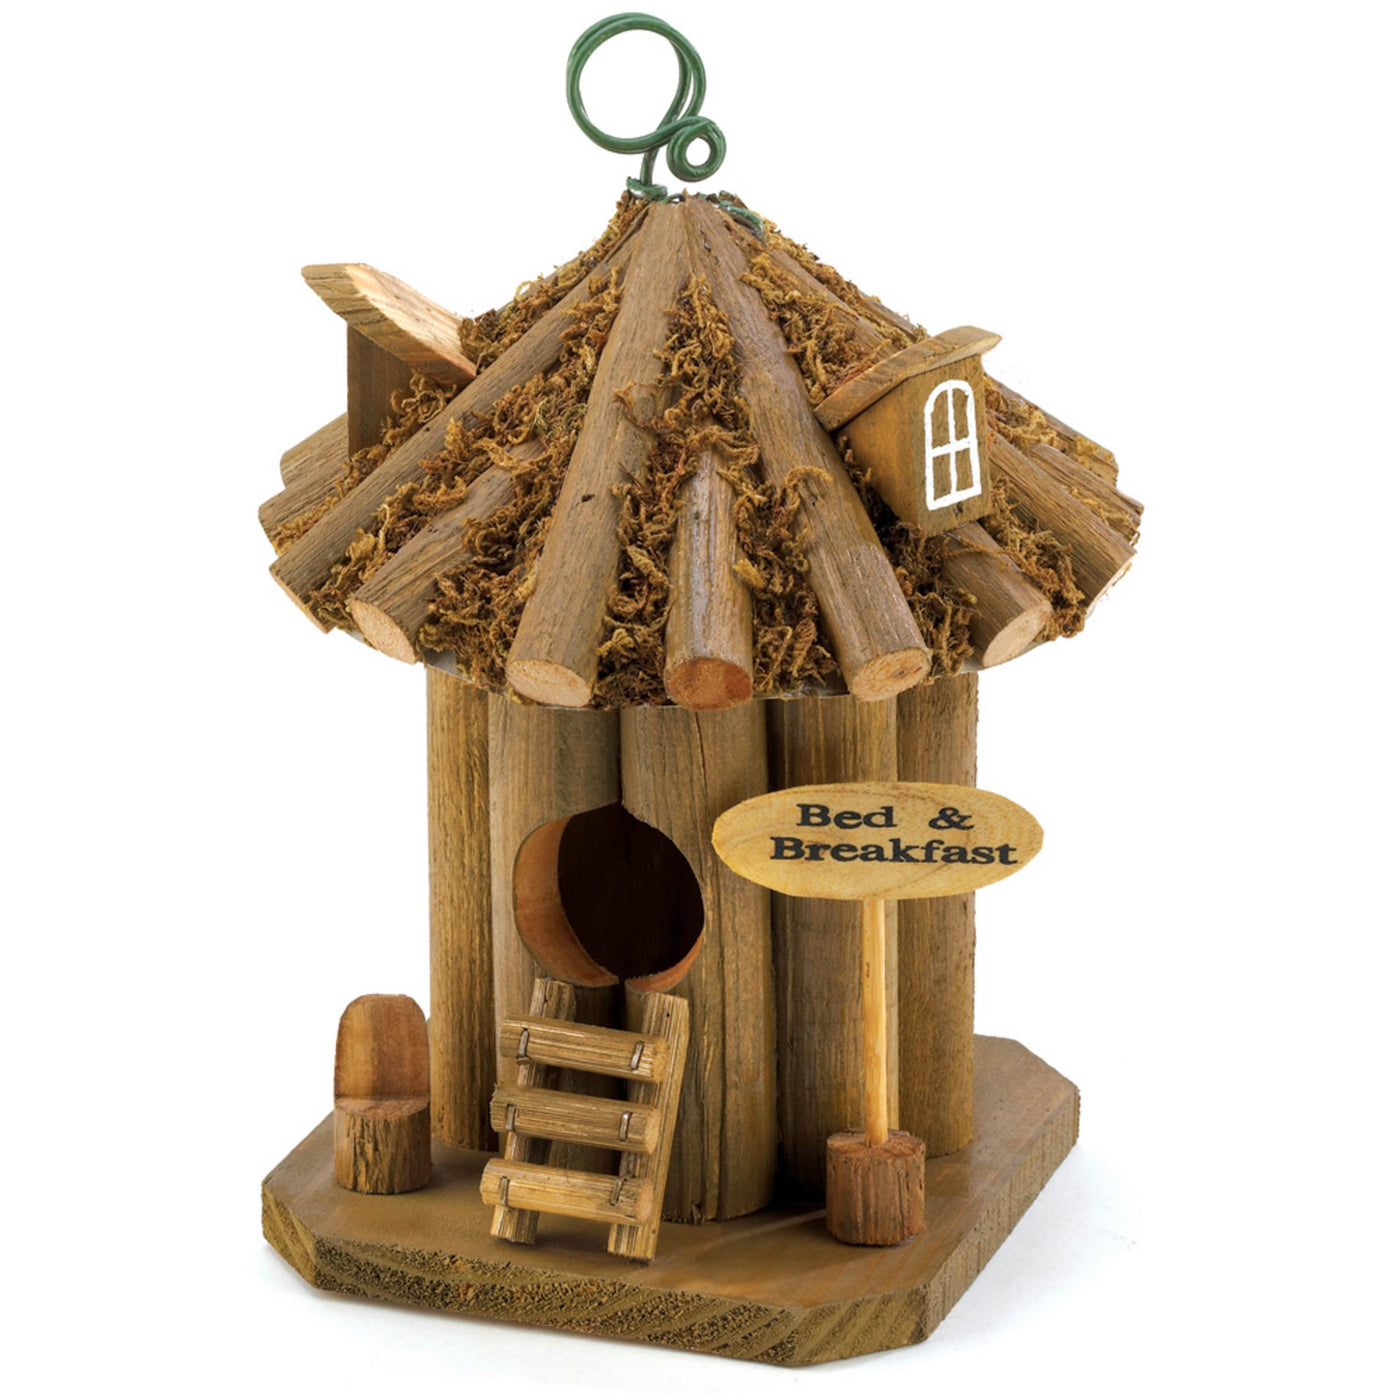 Bed and Breakfast Wood BIRDHOUSE